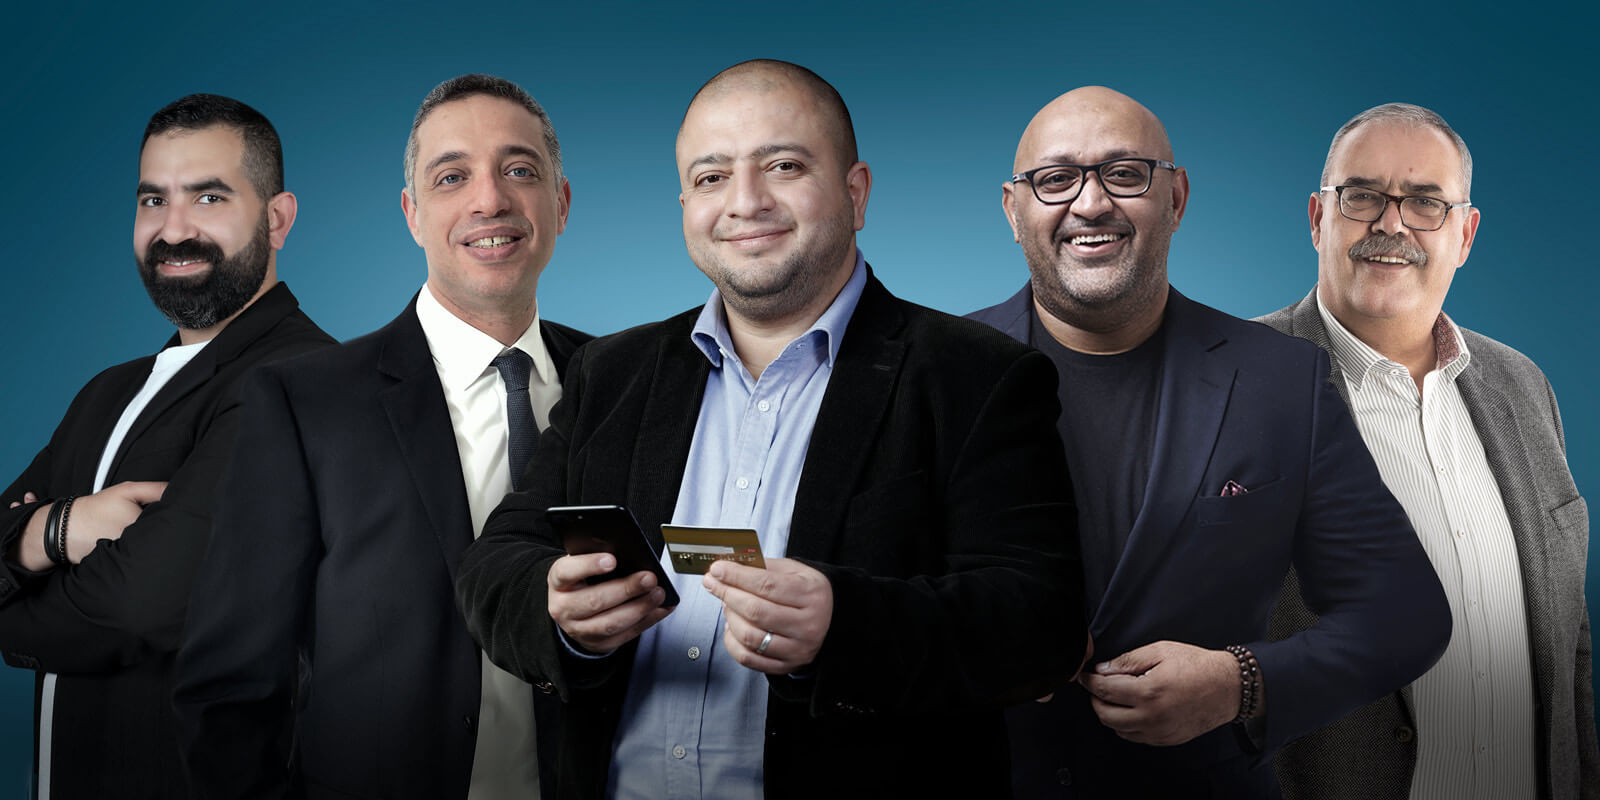 Awarded ‘Top Fintech Apps In The Middle East’ accolade, by Forbes Middle East